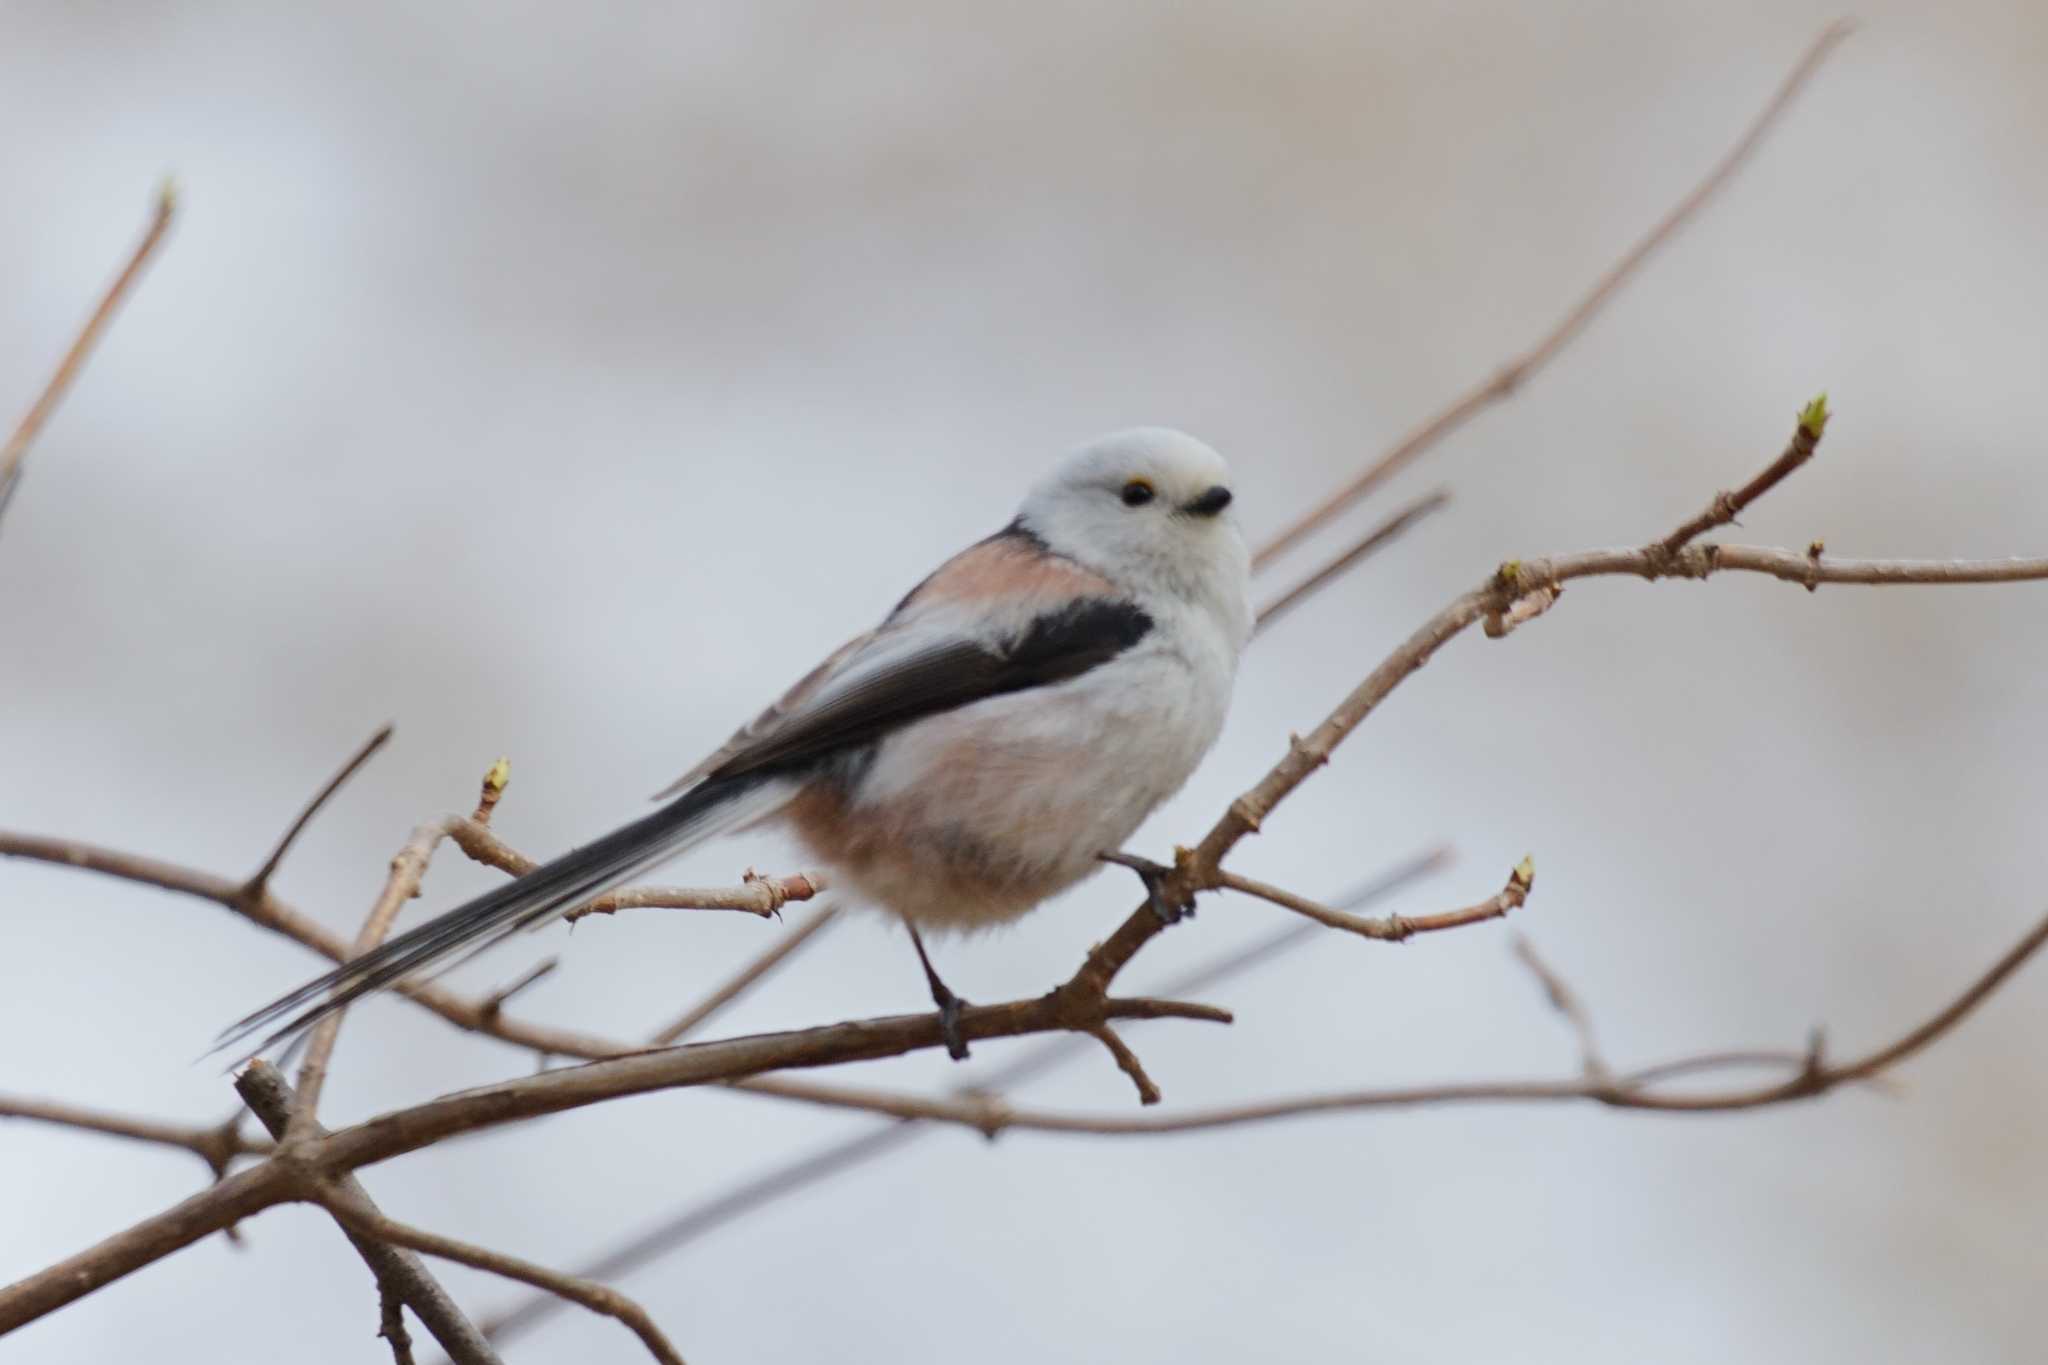 Photo of Long-tailed tit(japonicus) at 恵庭市;北海道 by まぼう